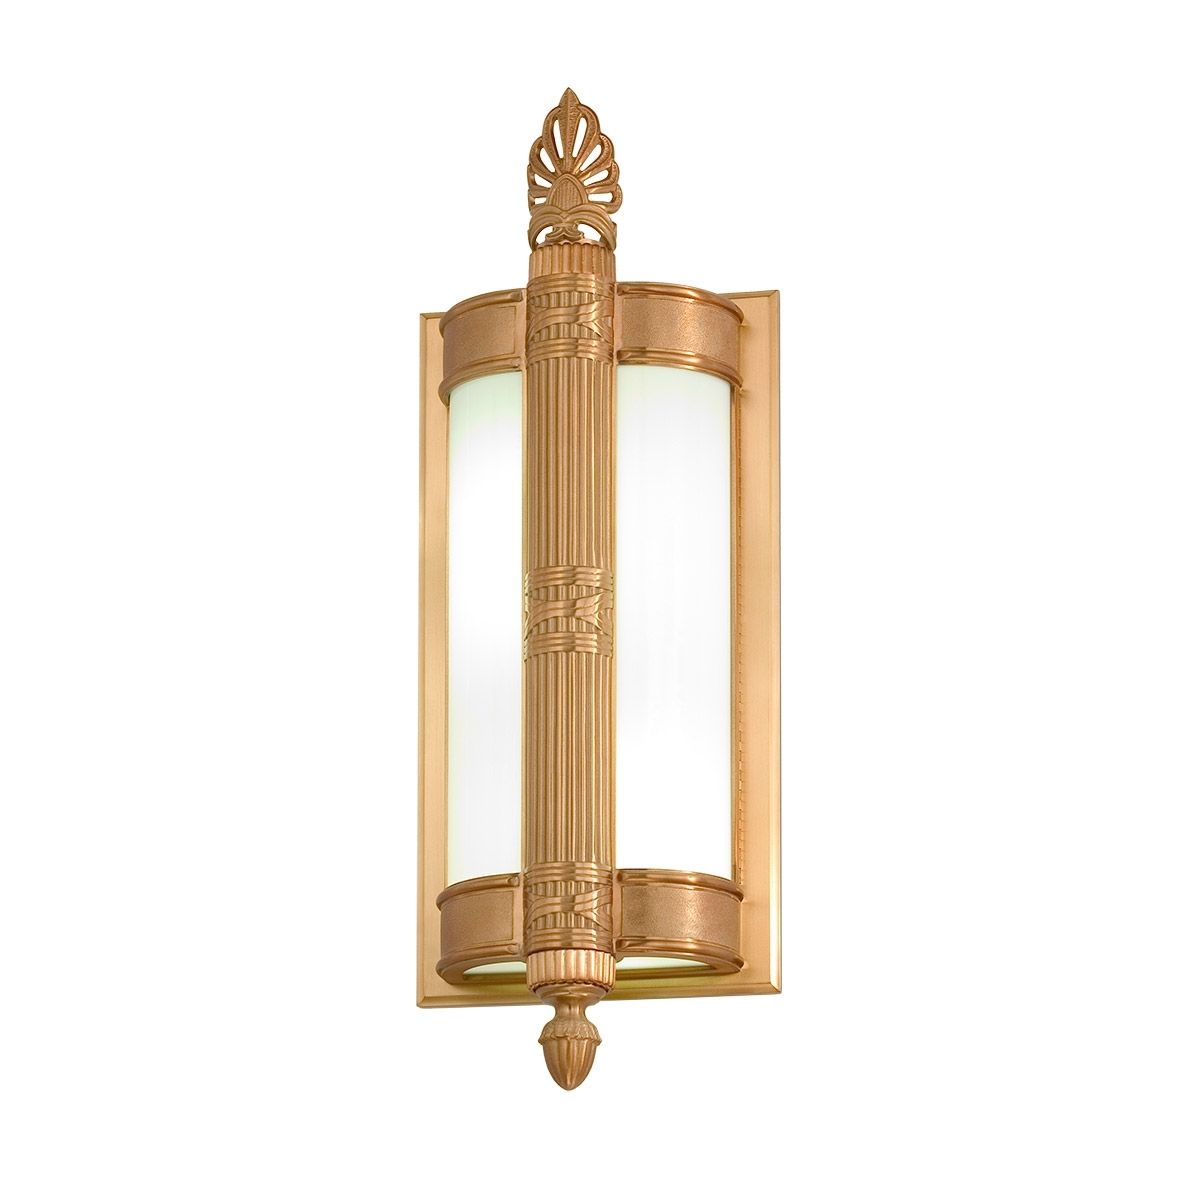 Ada Art Deco Wall Sconce | Crenshaw Lighting Throughout Most Recent Art Deco Wall Sconces (View 16 of 20)